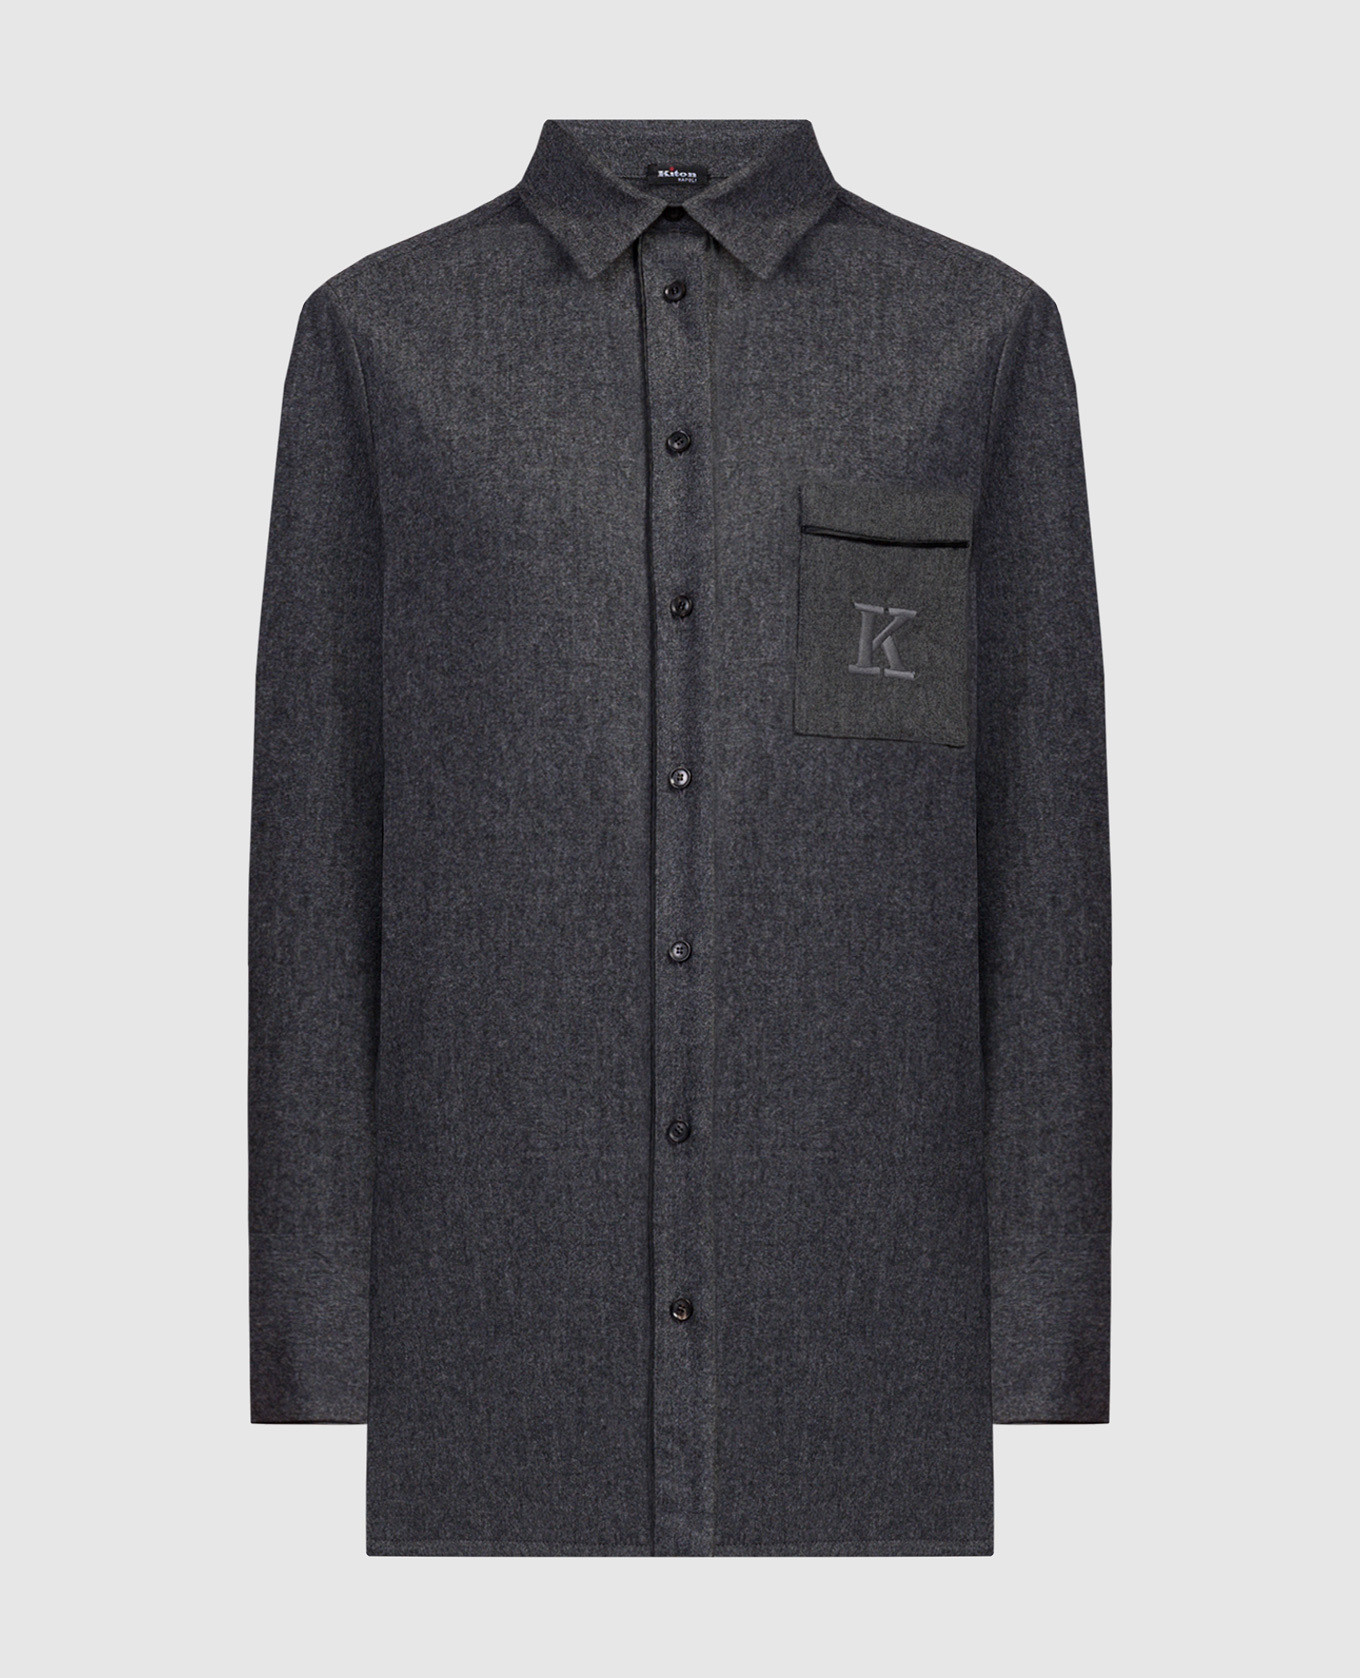 Gray wool and cashmere logo shirt